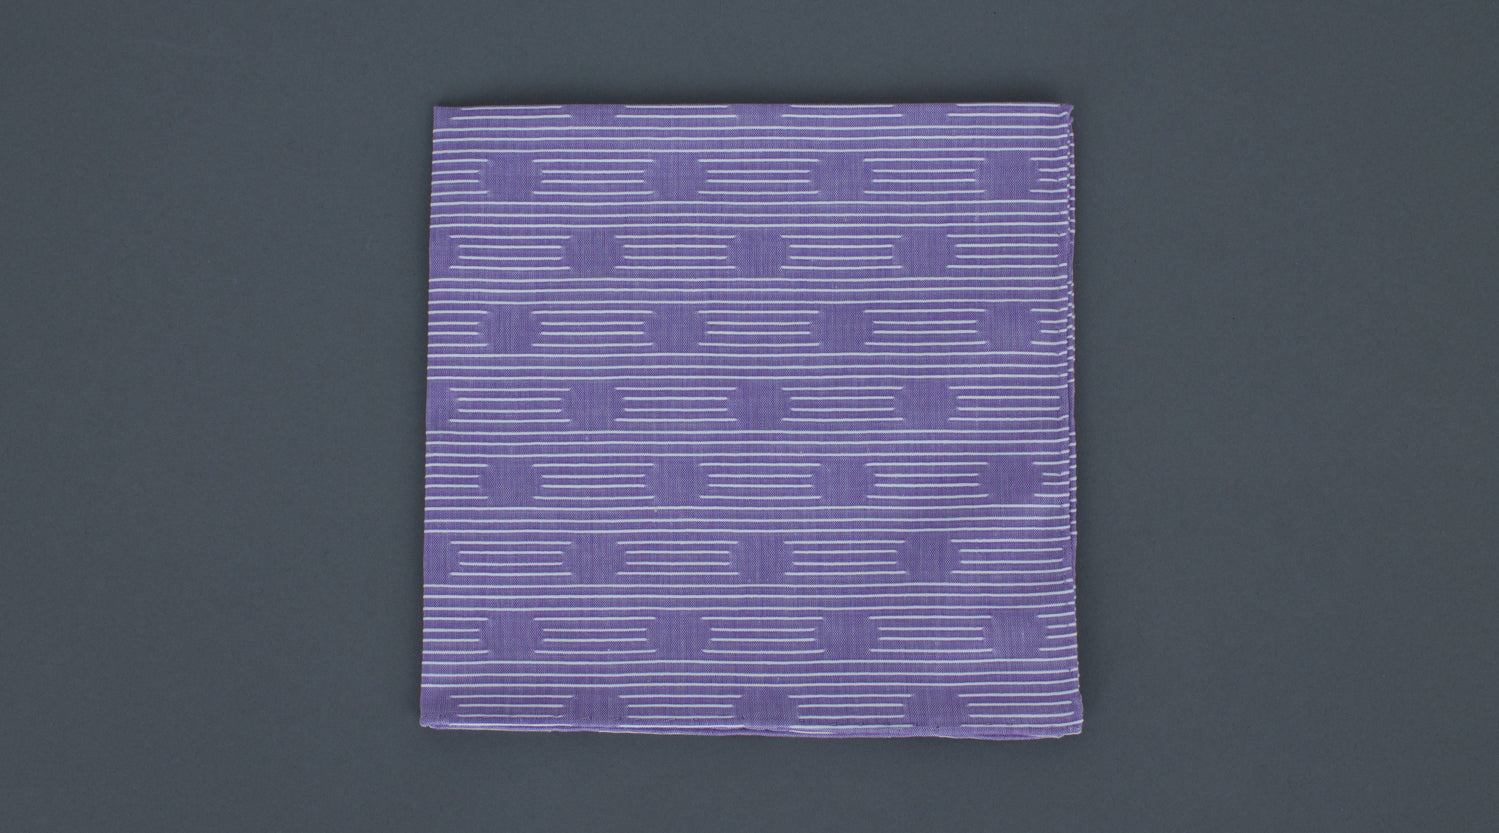 A high quality Simonnot Godard Violet Les Pois Fils Coupe Cotton Pocket Square made of cotton, featuring purple and white stripes on a grey background.